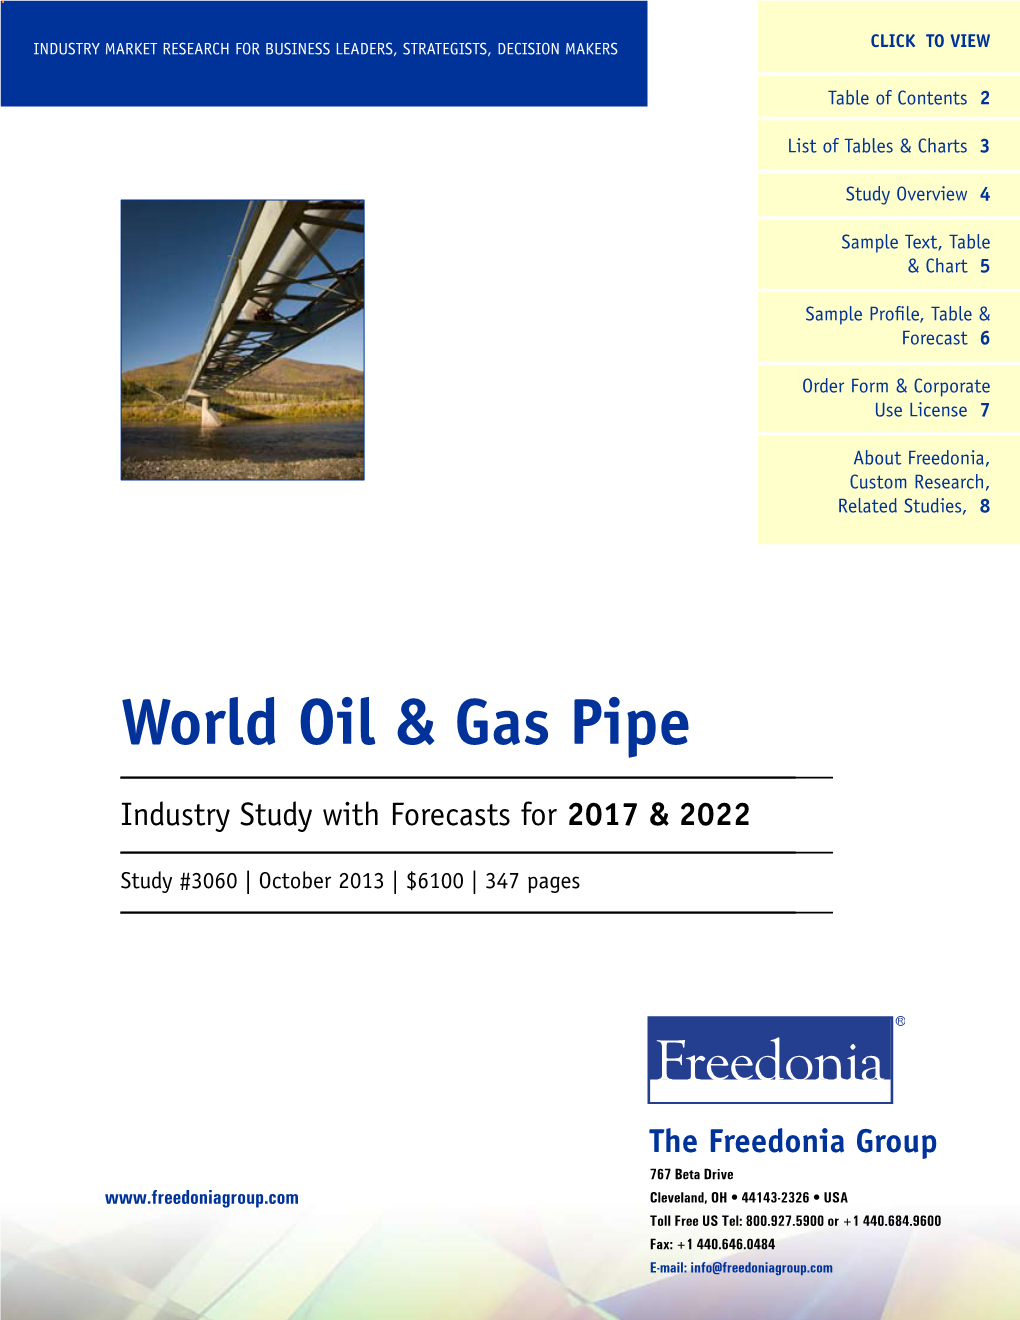 World Oil & Gas Pipe